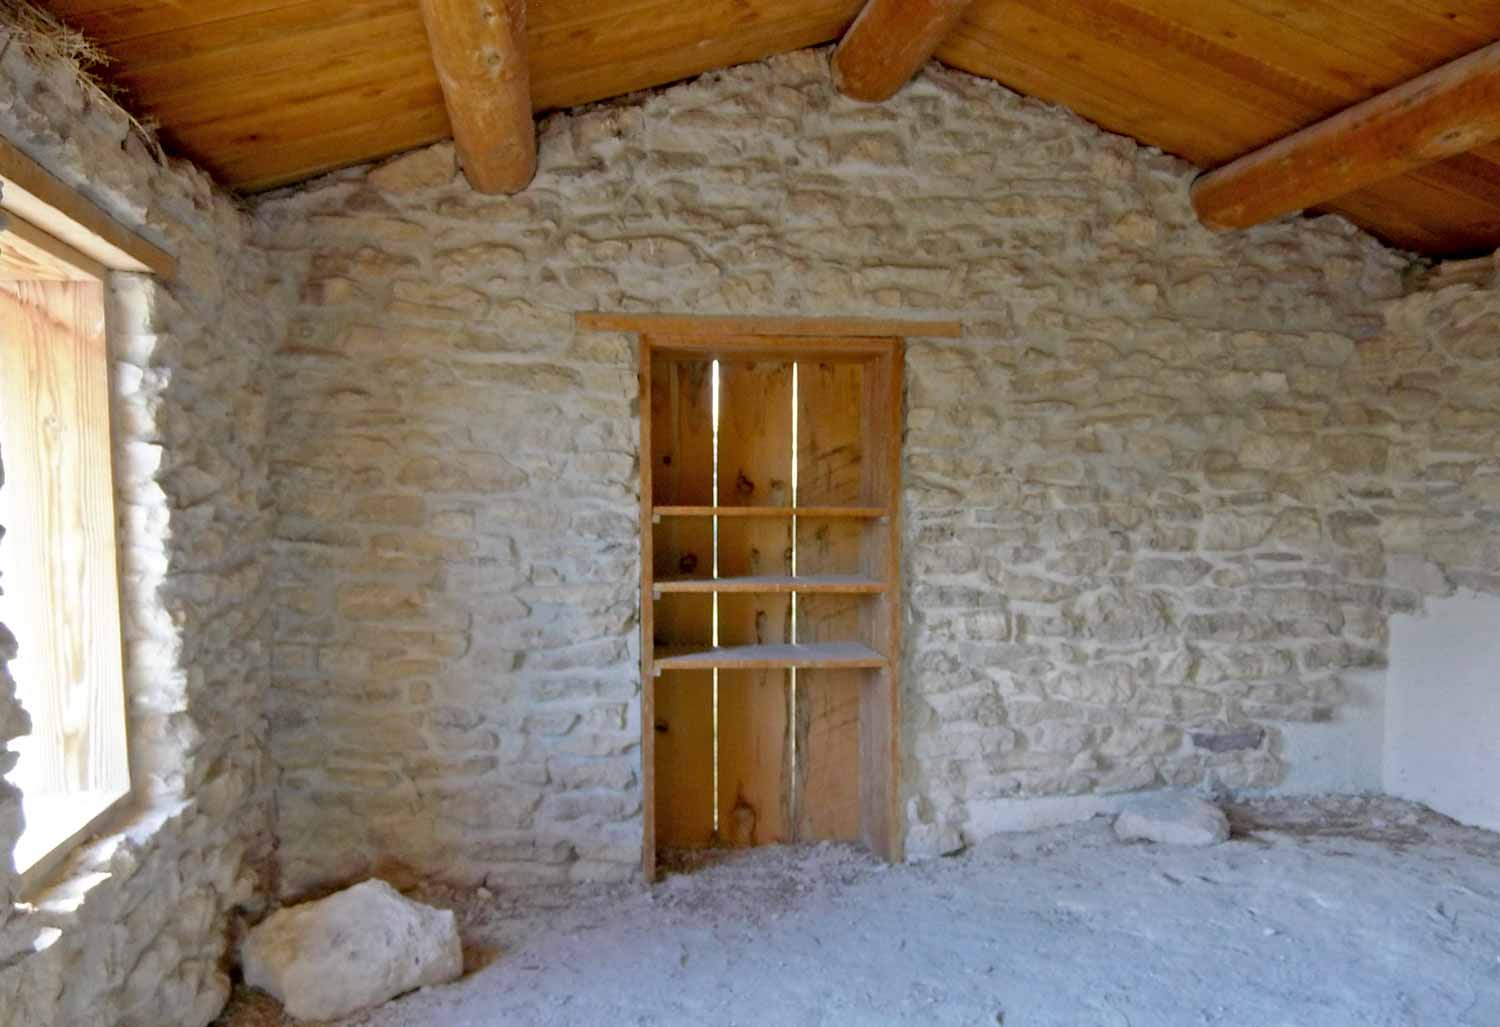 View inside the Longstreet cabin, a blank wall with a cut out wooden cupboard area.